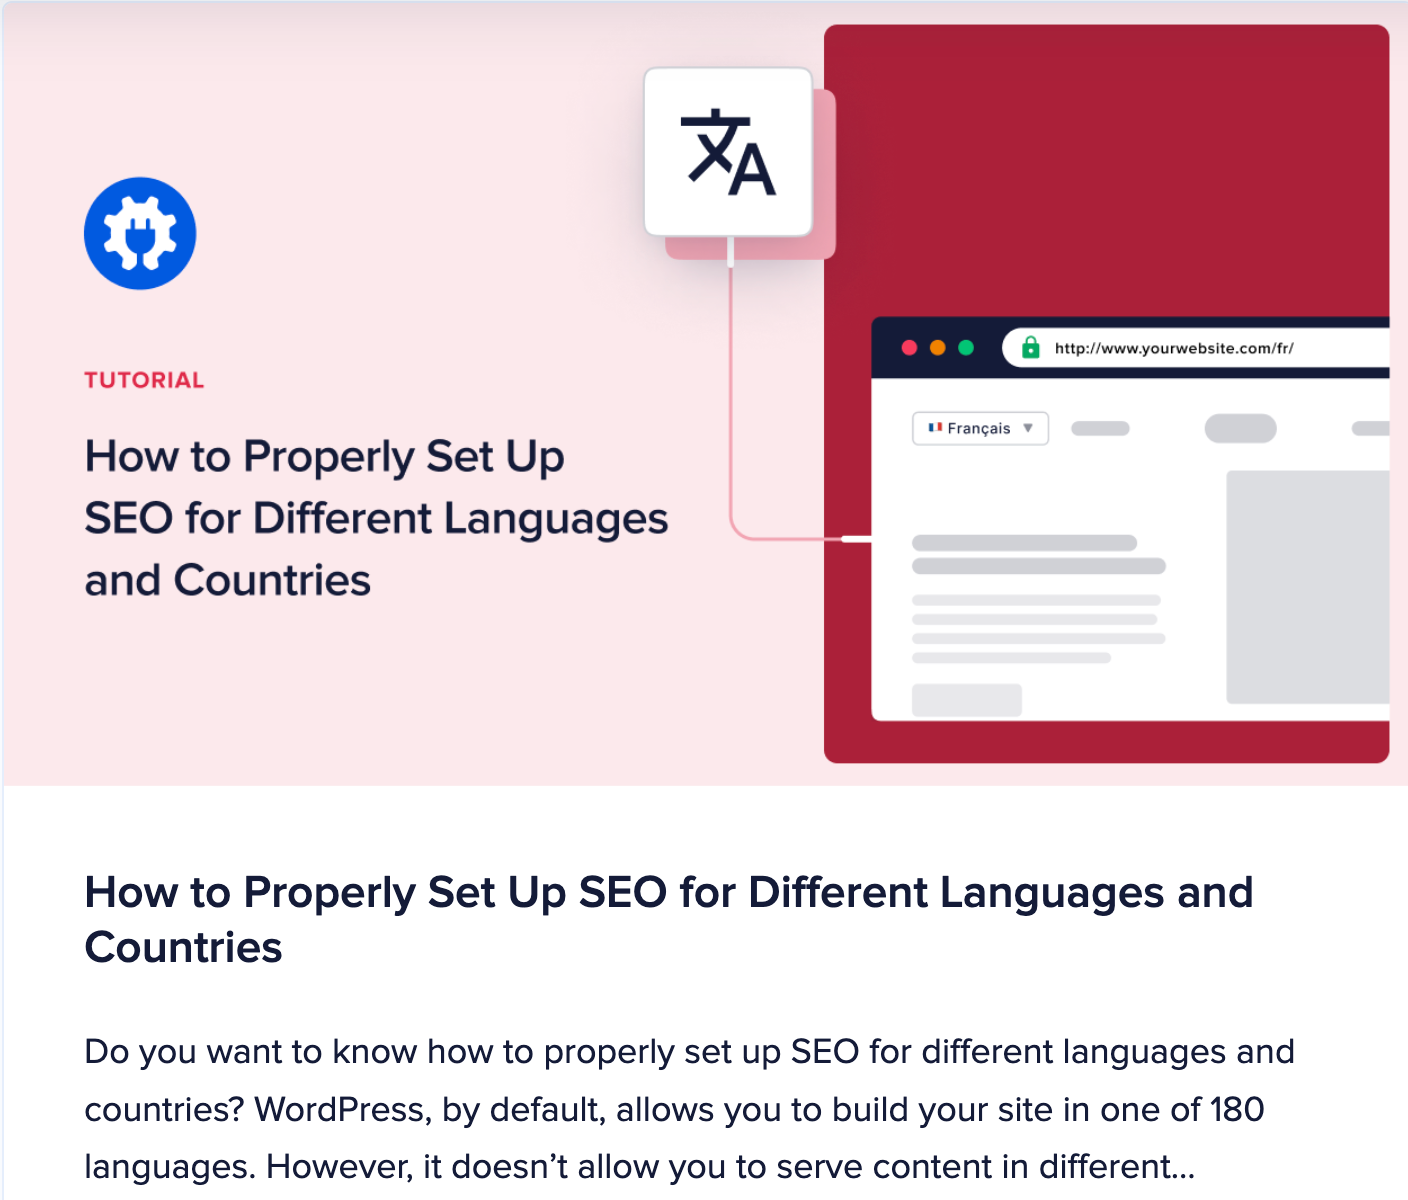 Learn about setting up SEO in different languages.